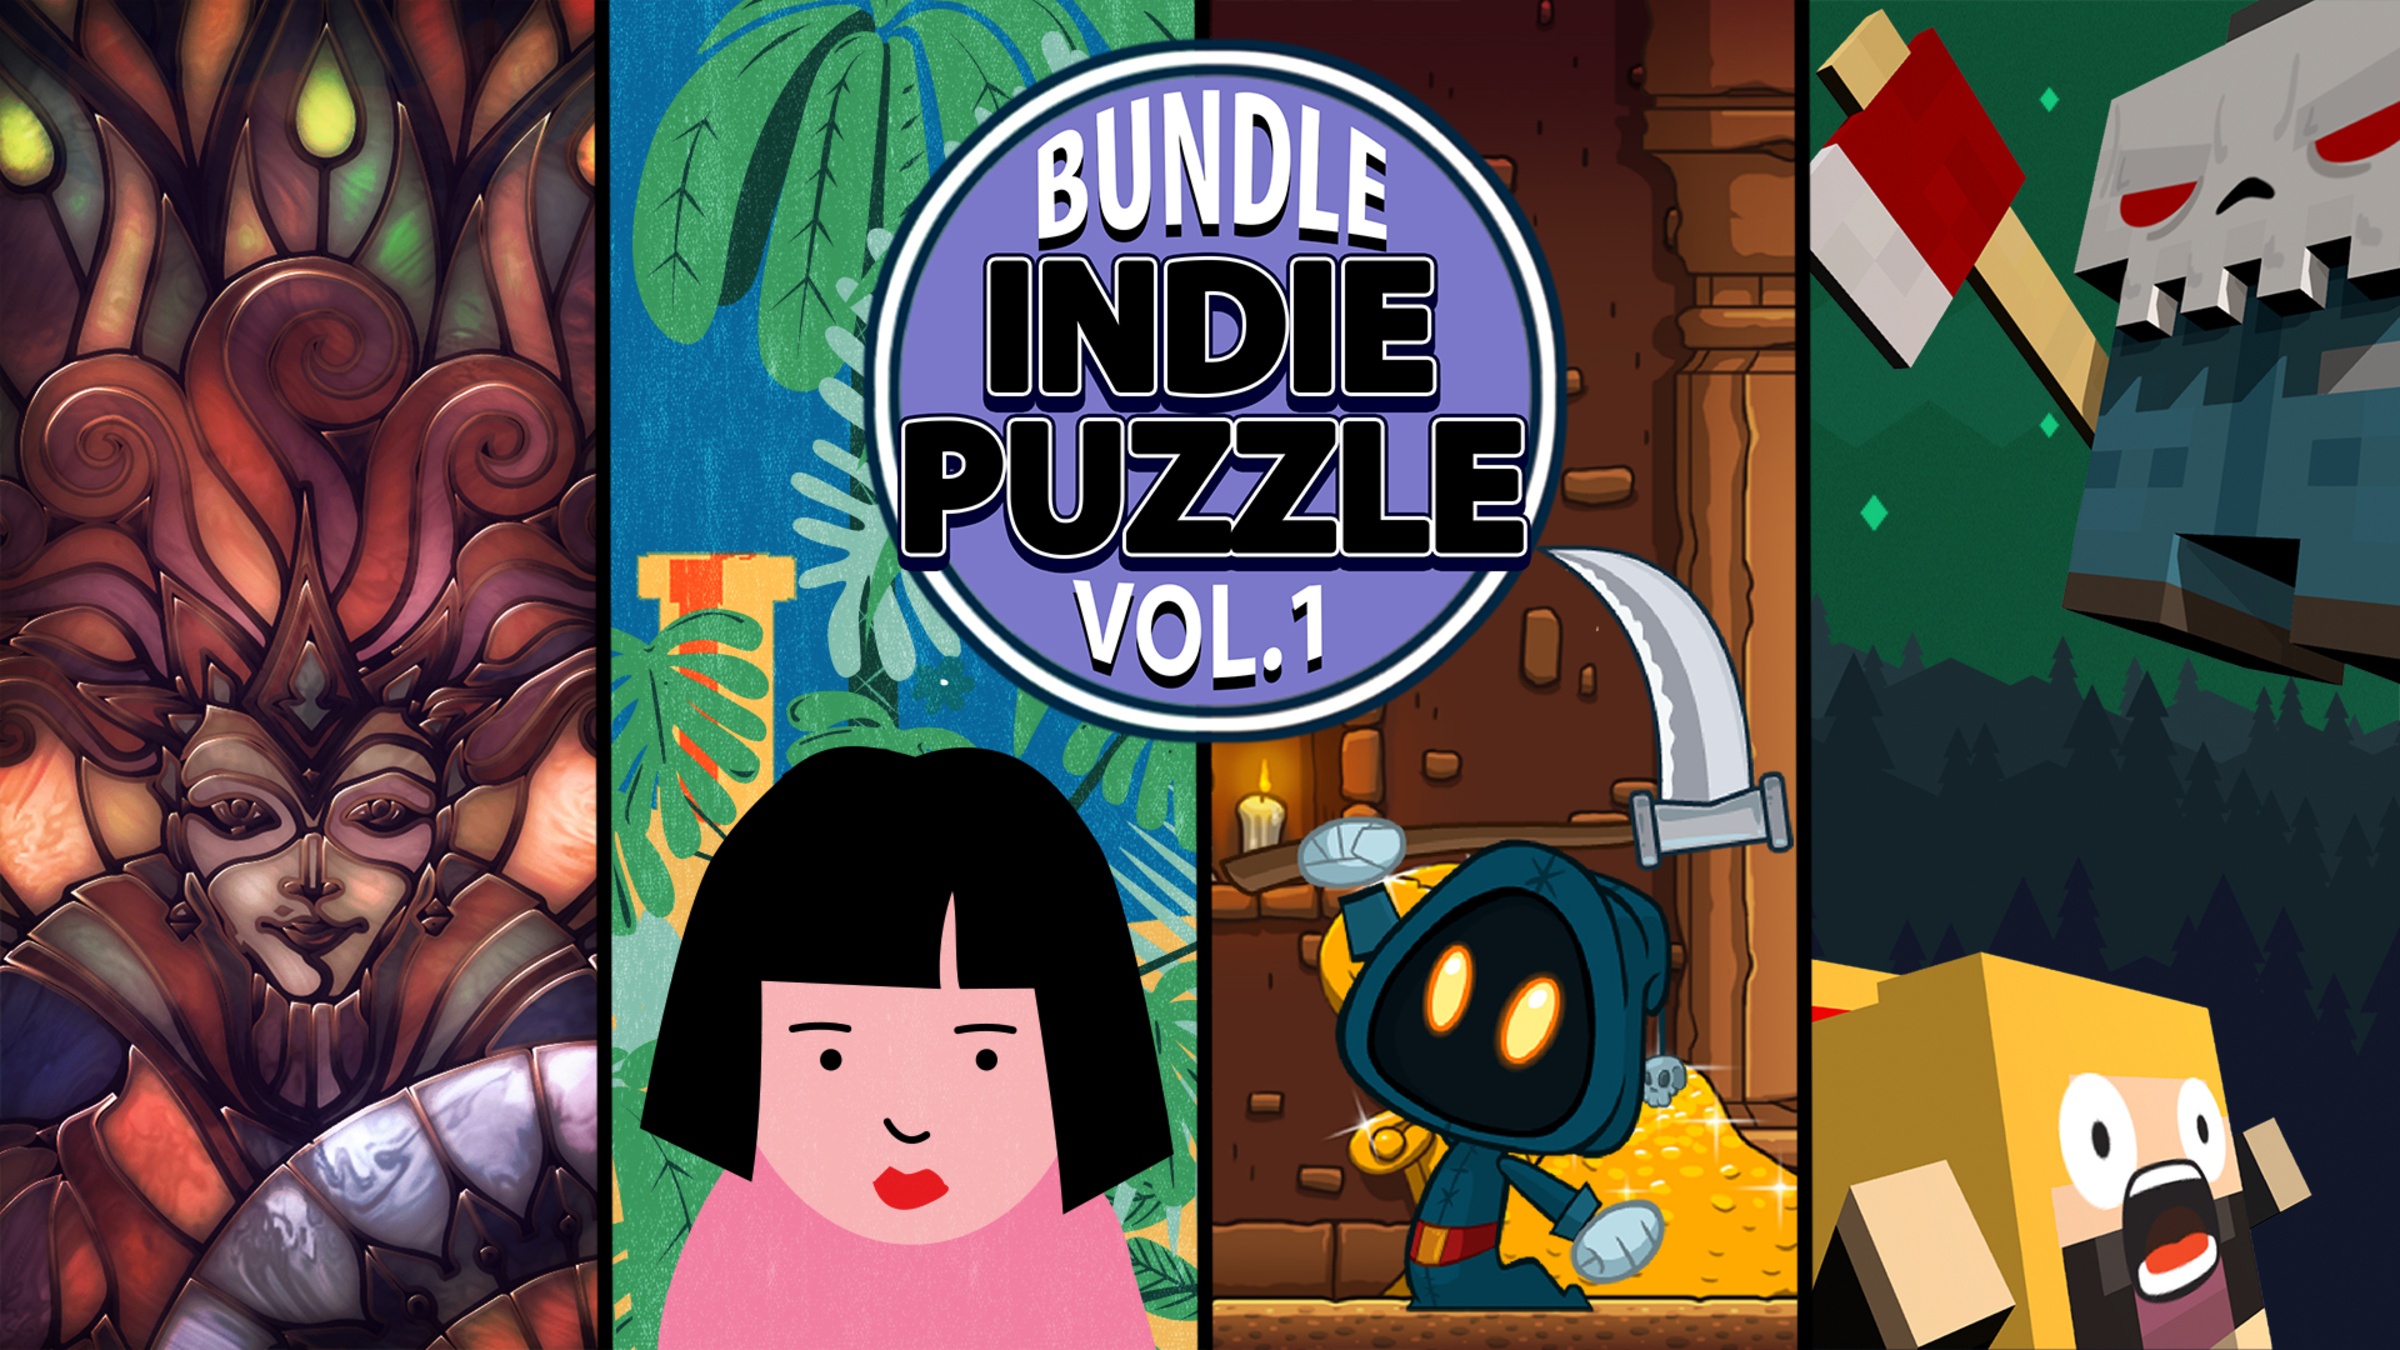 Overall I would give this bundle a solid B- #indiegame #indiegames #ga